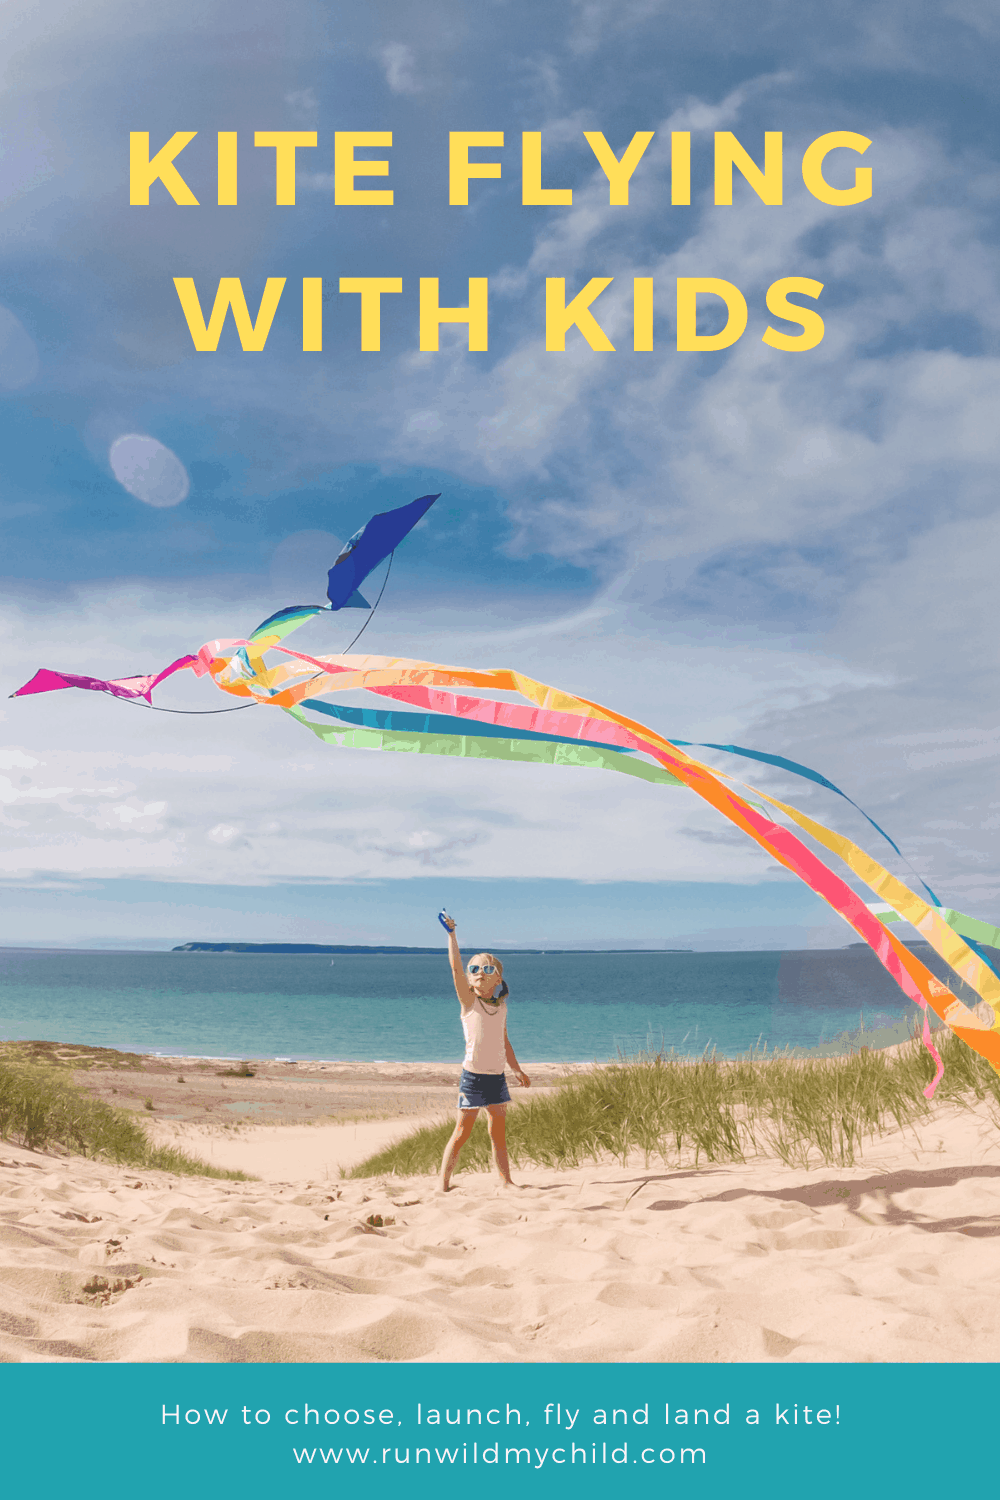 How to Fly a Kite with Kids - Kite Flying